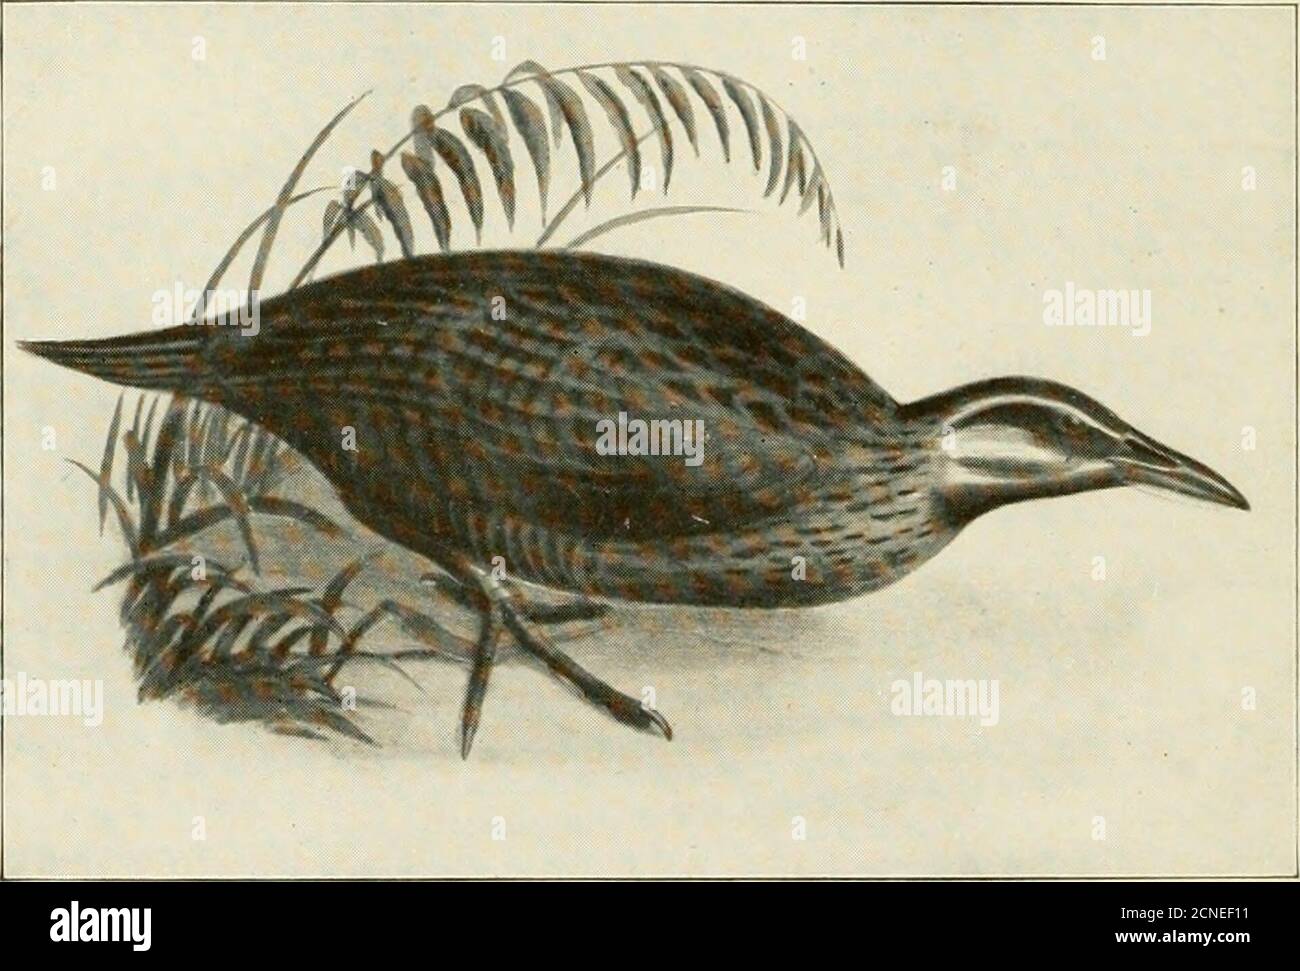 . The animals of New Zealand; an account of the dominion's air-breathing vertebrates . ng black wood hen went every morningand evening to his camp in the gorge, uttering a shrill whistle ofone note, and, on his throwing her a piece of biscuit, she wouldpick it up, throw it on the ground till it broke, and then eat it. 188 THE ANIMALS OF NEW ZEALAND She became so tame that she would walk round his dog, and comeinto the tent, and, on a second visit to the camp, he found that shestill hanntecl the place. On one occasion, at daylight, he wasawakened by a noise, and, on looking up, saw one of these Stock Photo